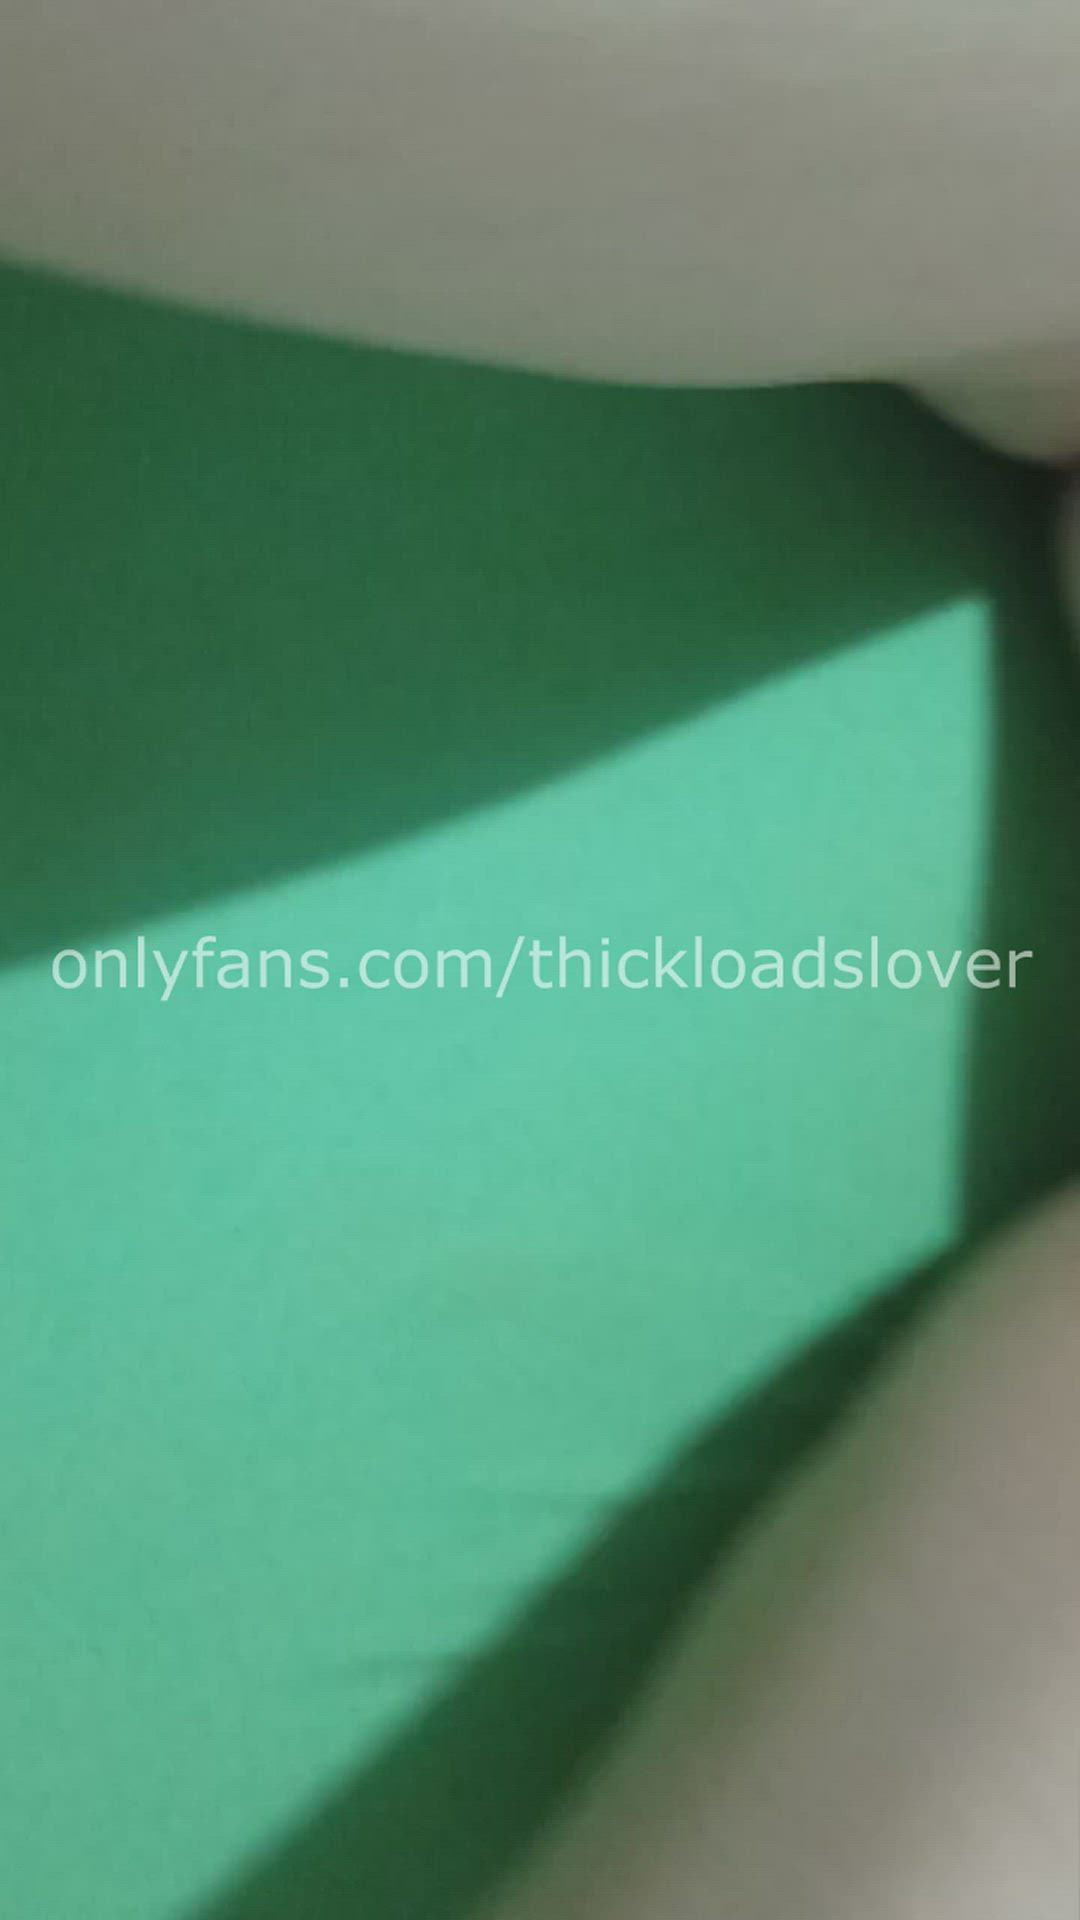 Ass porn video with onlyfans model onlyfans.com/thickloadslover <strong>@thickloadslover</strong>